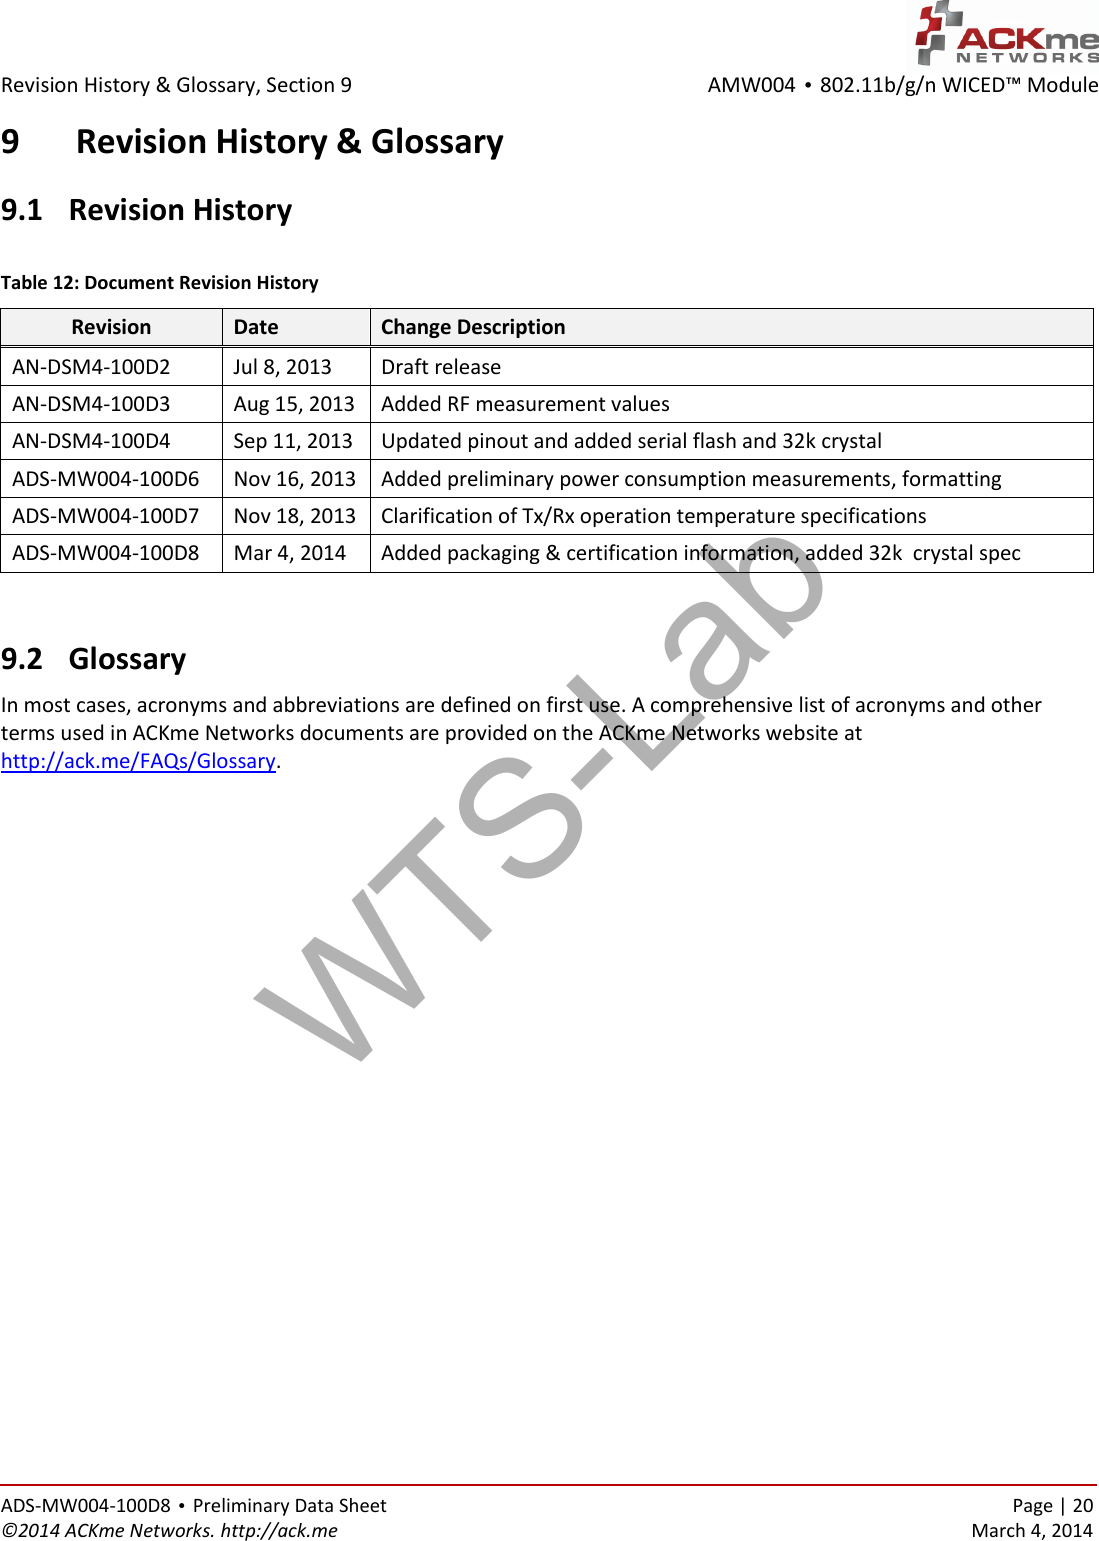 AMW004 • 802.11b/g/n WICED™ Module  Revision History &amp; Glossary, Section 9   ADS-MW004-100D8 • Preliminary Data Sheet    Page | 20 ©2014 ACKme Networks. http://ack.me    March 4, 2014 9 Revision History &amp; Glossary 9.1  Revision History  Table 12: Document Revision History Revision Date Change Description AN-DSM4-100D2 Jul 8, 2013 Draft release AN-DSM4-100D3 Aug 15, 2013 Added RF measurement values AN-DSM4-100D4 Sep 11, 2013 Updated pinout and added serial flash and 32k crystal ADS-MW004-100D6 Nov 16, 2013 Added preliminary power consumption measurements, formatting ADS-MW004-100D7 Nov 18, 2013 Clarification of Tx/Rx operation temperature specifications ADS-MW004-100D8 Mar 4, 2014 Added packaging &amp; certification information, added 32k  crystal spec   9.2  Glossary In most cases, acronyms and abbreviations are defined on first use. A comprehensive list of acronyms and other terms used in ACKme Networks documents are provided on the ACKme Networks website at http://ack.me/FAQs/Glossary.    WTS-Lab